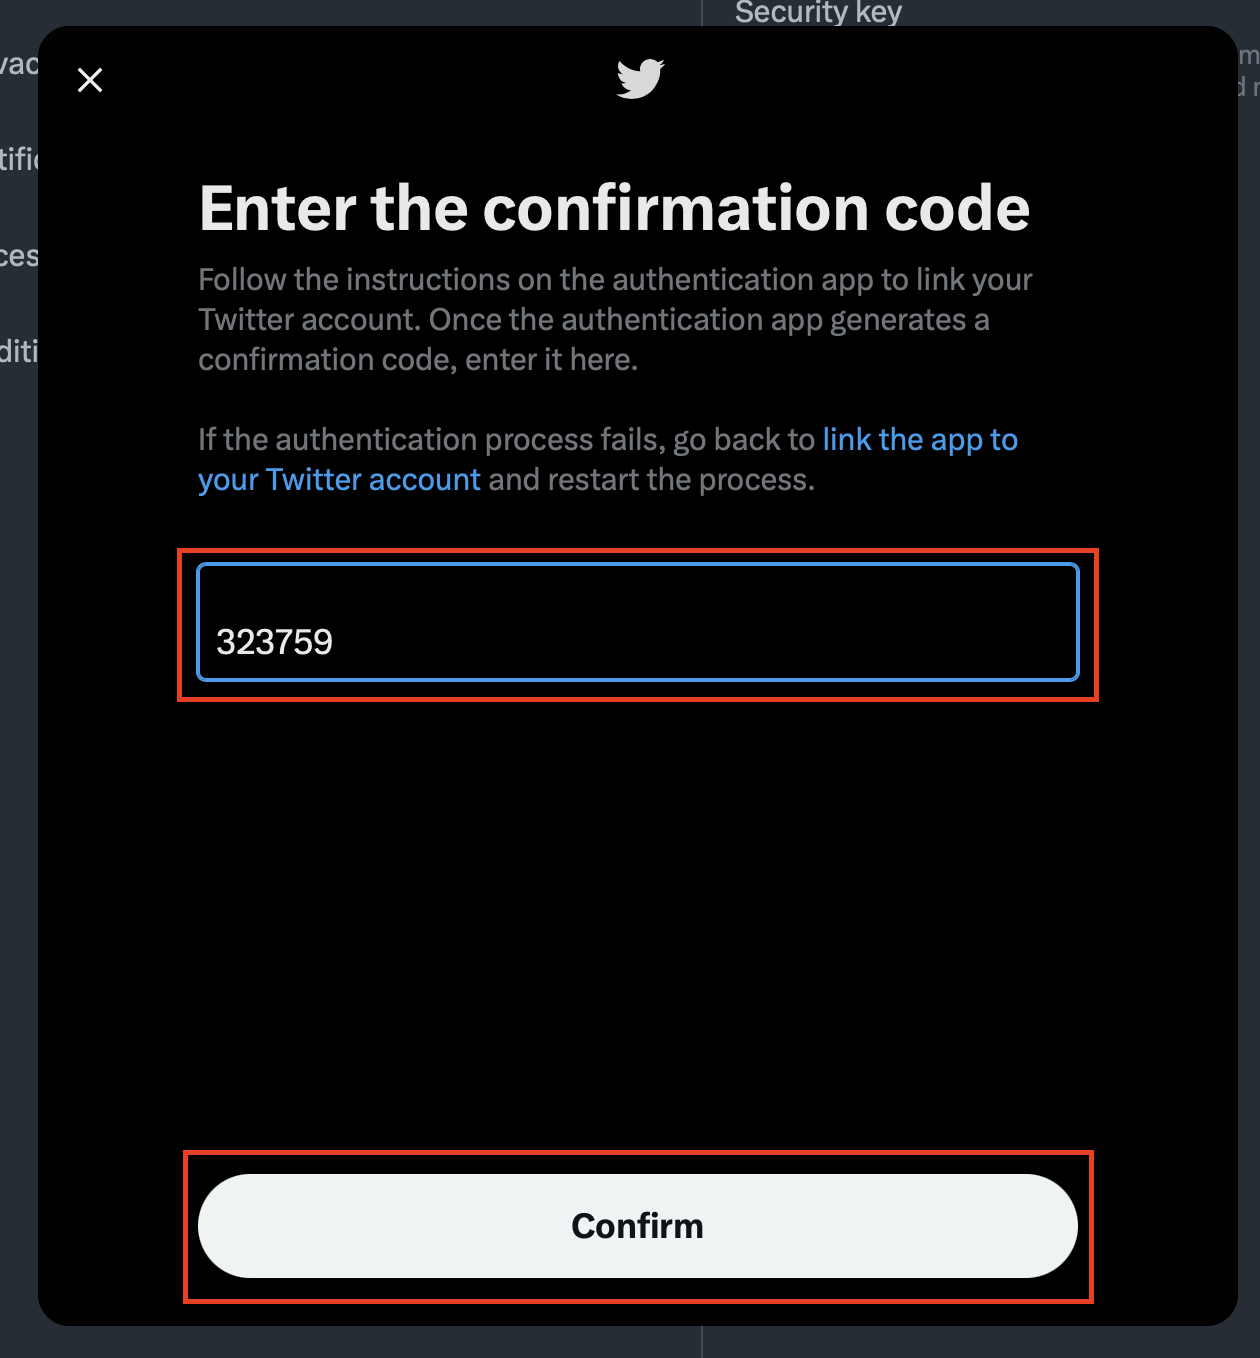 Enter the code currently showing for Twitter in your authentication app, then click the "Confirm" button. Note that the code usually refreshes every 30 seconds, so you may need to wait for the next code if you're about to hit that time limit.